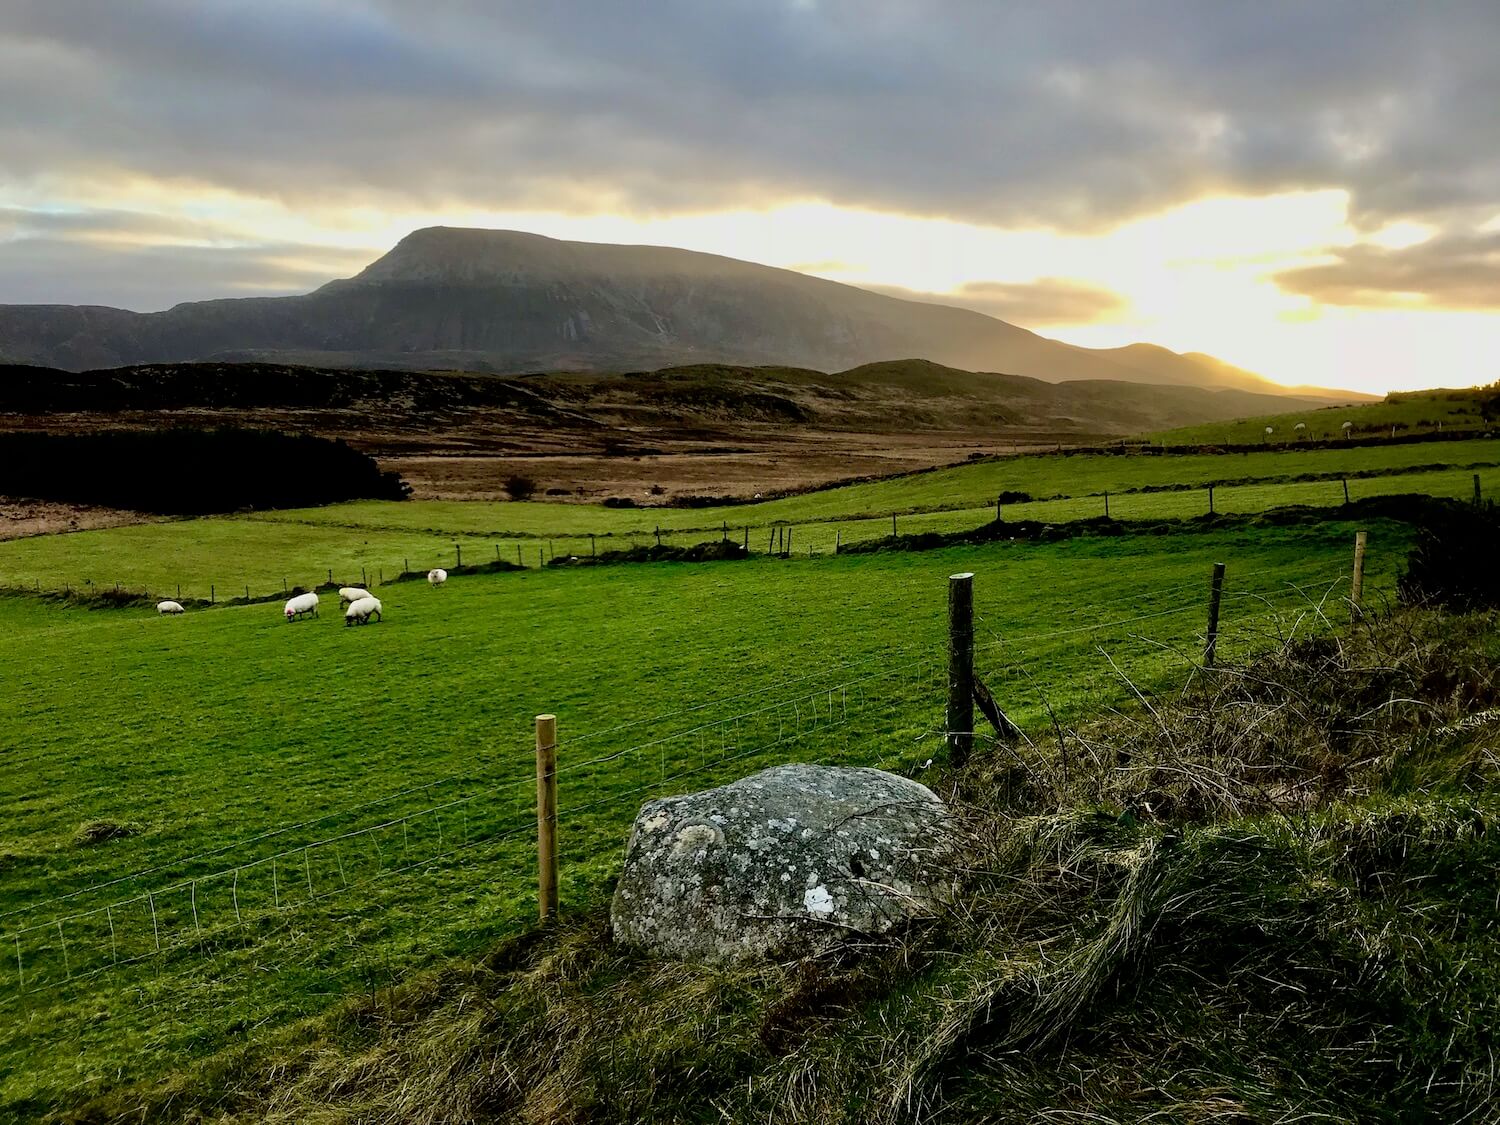 The buttery glow of a winter sunset begins to take over the gray cloudy sky behind the prominent rise of Muckish Mountain. In the foreground is abundant peat bogs and rolling hills of green pastures with sheep grazing. The is a typical landscape in Donegal, in northwest Ireland.